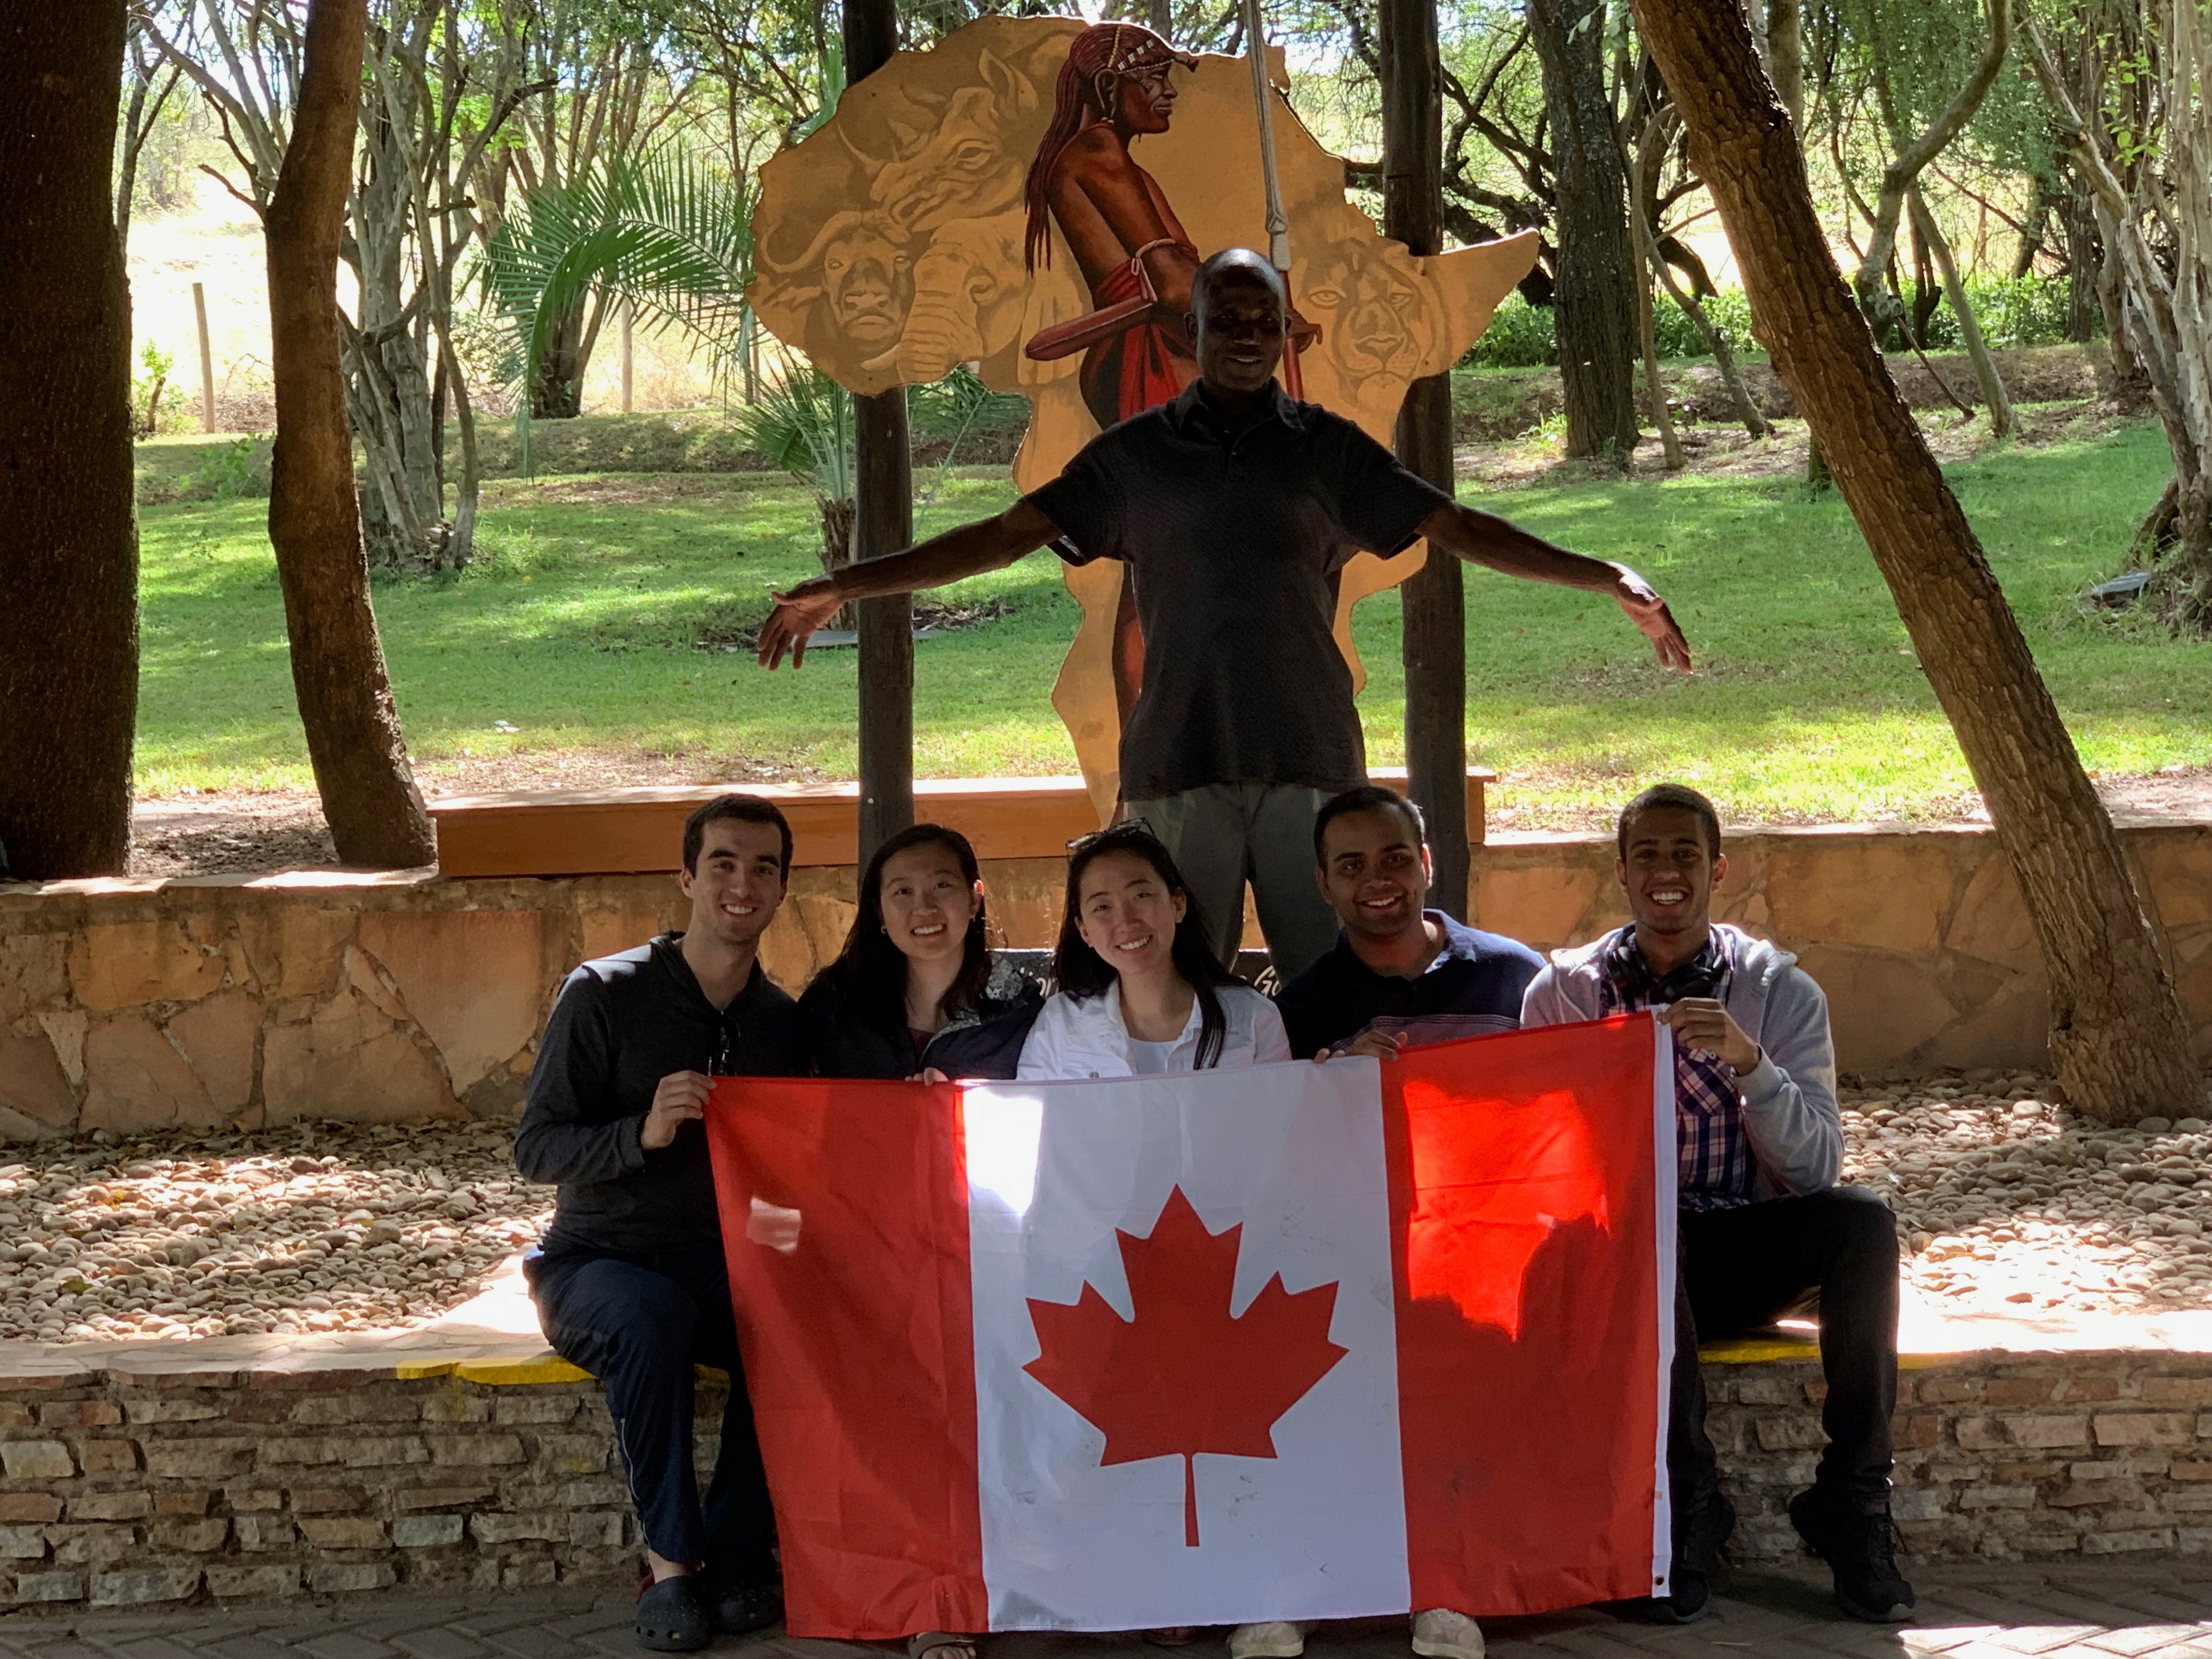 Students posing together holding a Canadian flag